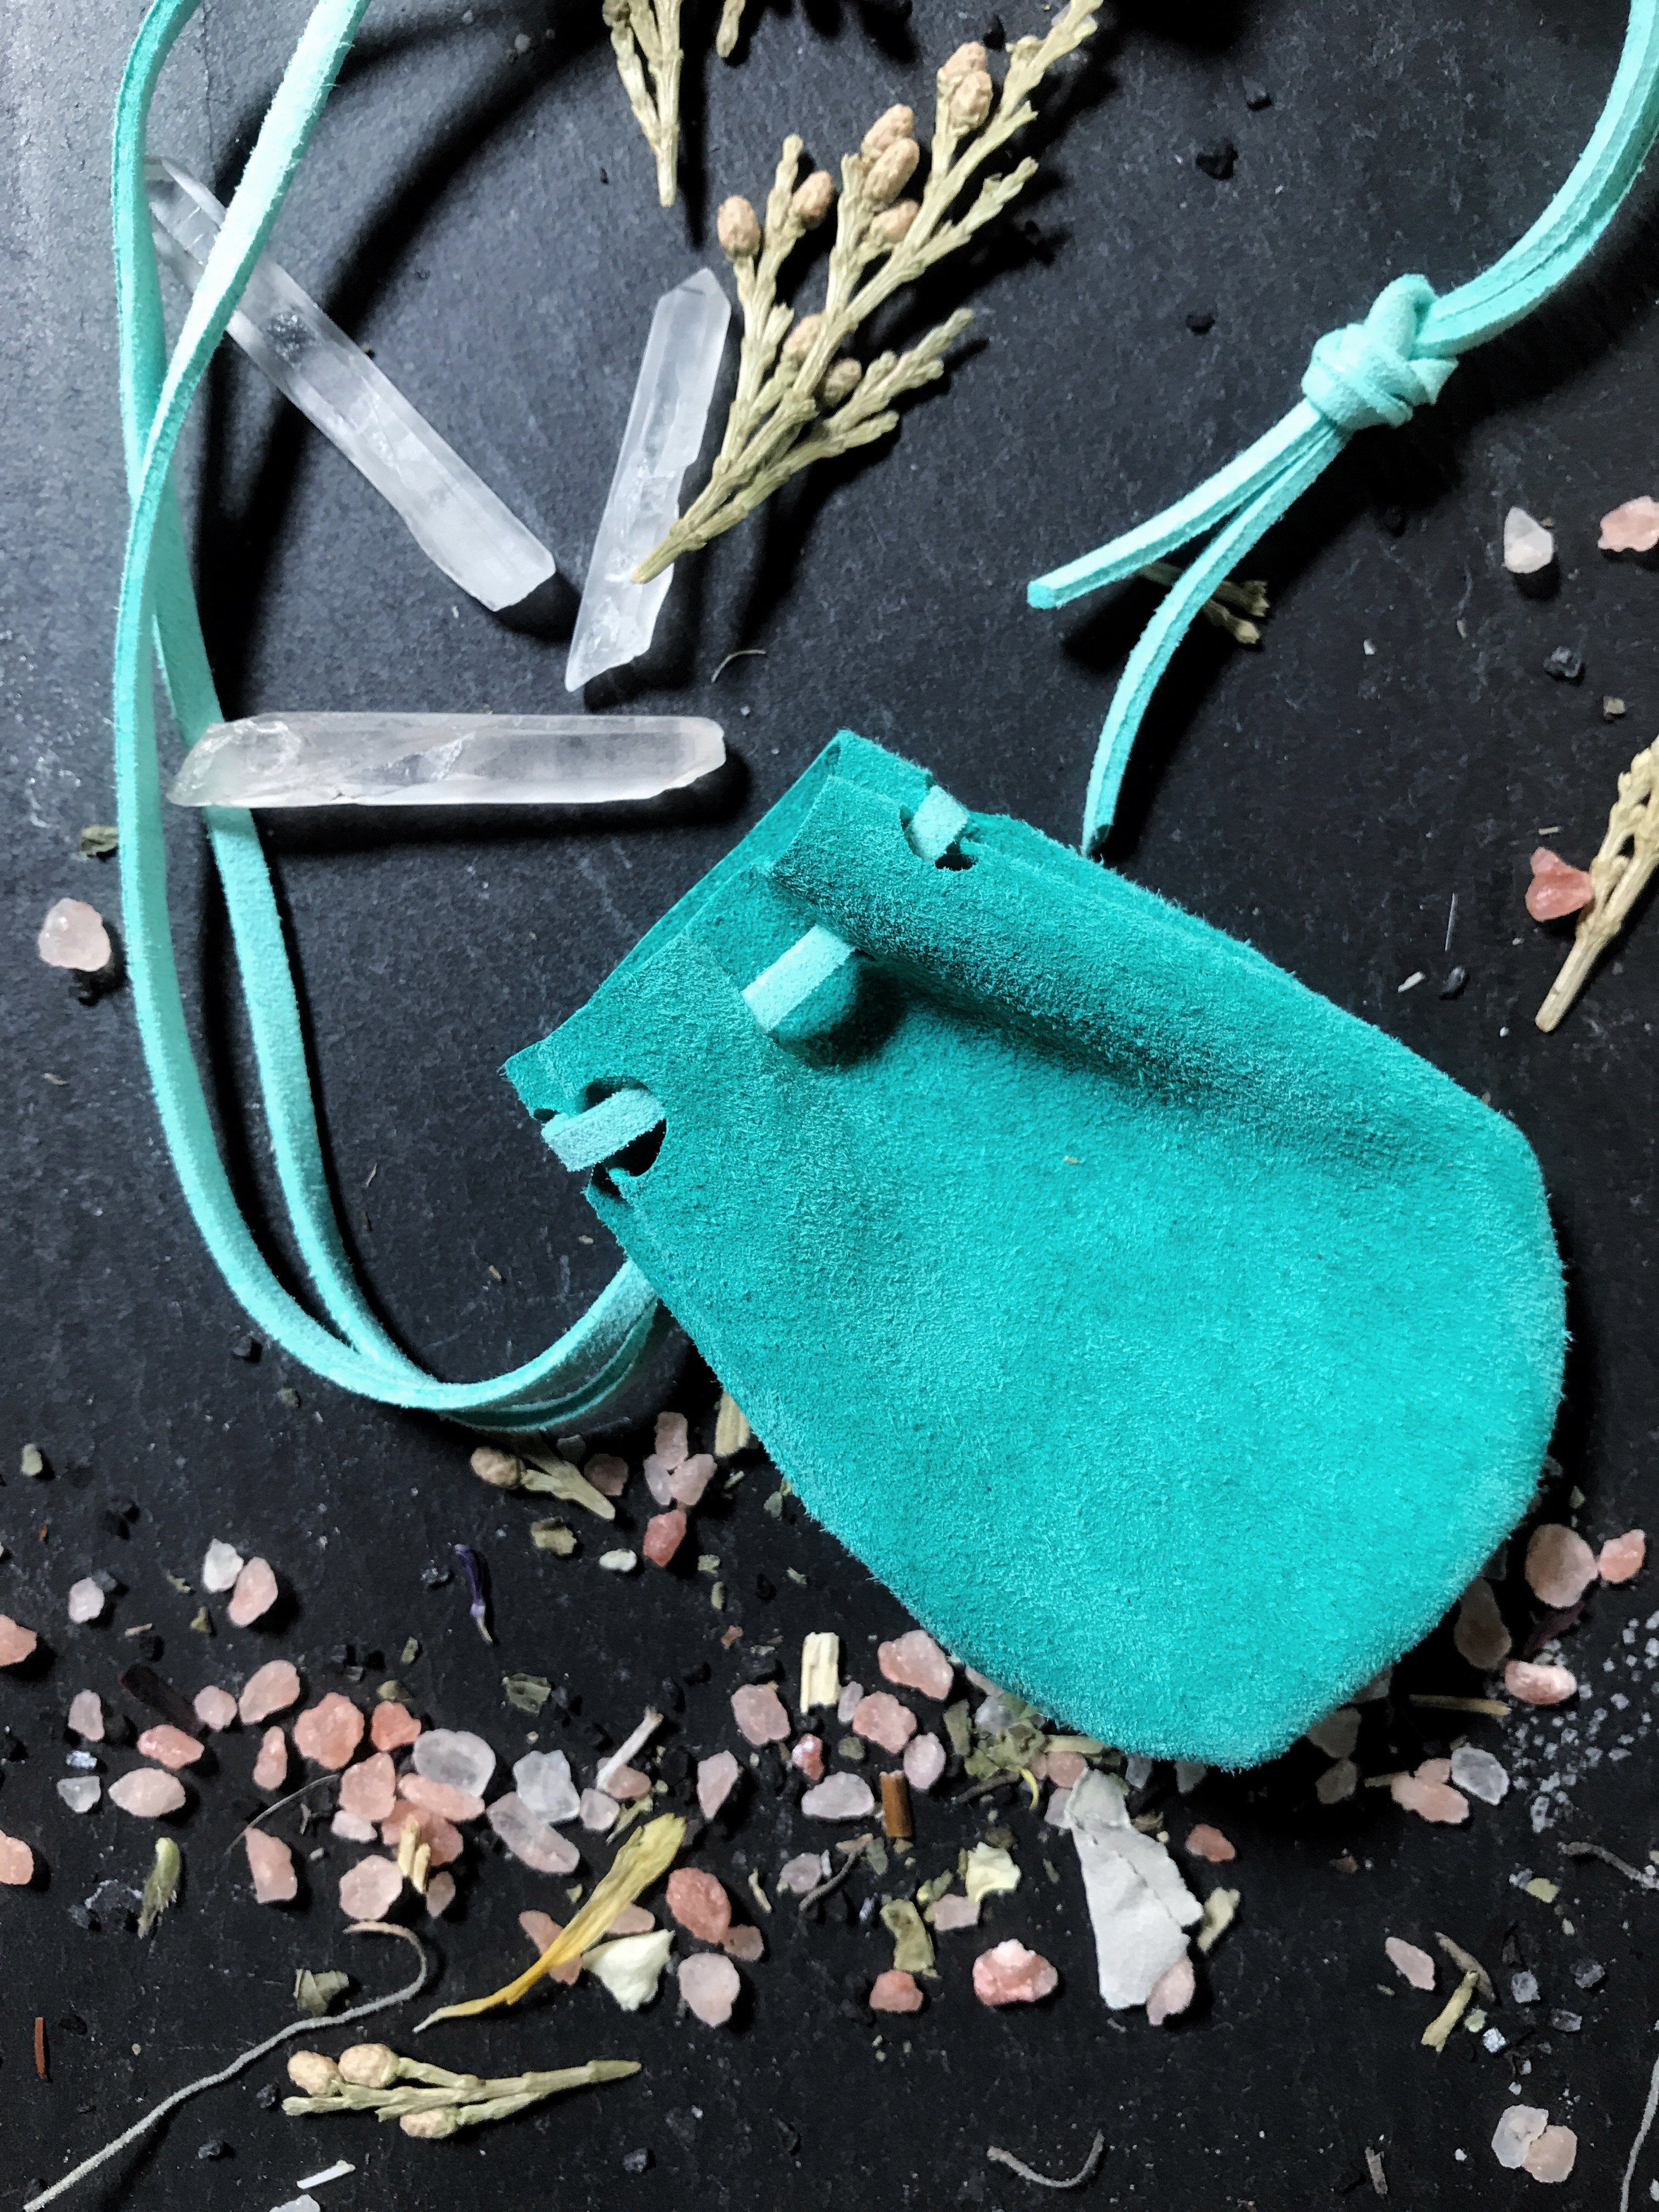 Handmade, Leather Crystal / Medicine Pouches / Gris Gris / Mojo Pouch - Keven Craft Rituals